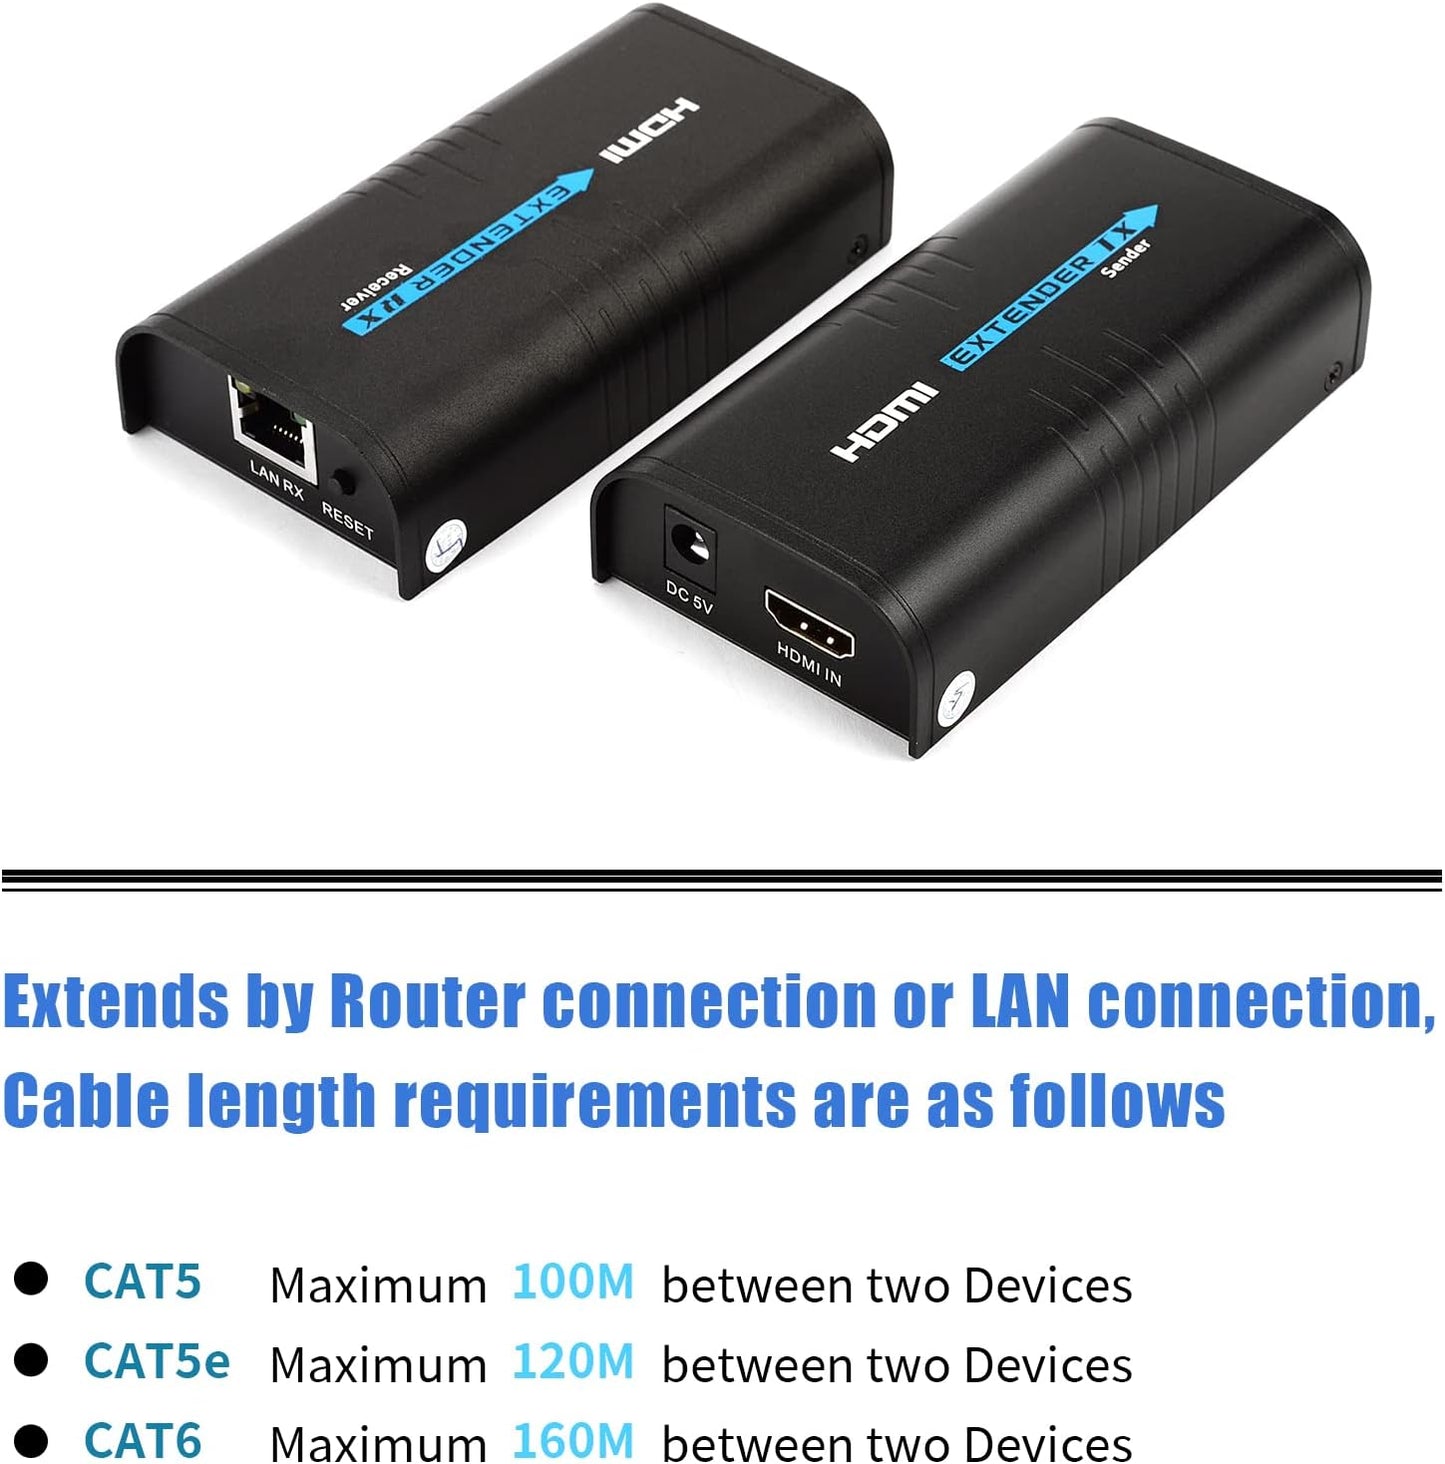 HDMI Extender 400Ft(120M),1 to Many over IP LAN Switch,1080P@60Hz Full HD Video and Audio by Single Cat5 Cat5E Cat6 Cat6E Cat7 Cable,Transmitter and Receiver